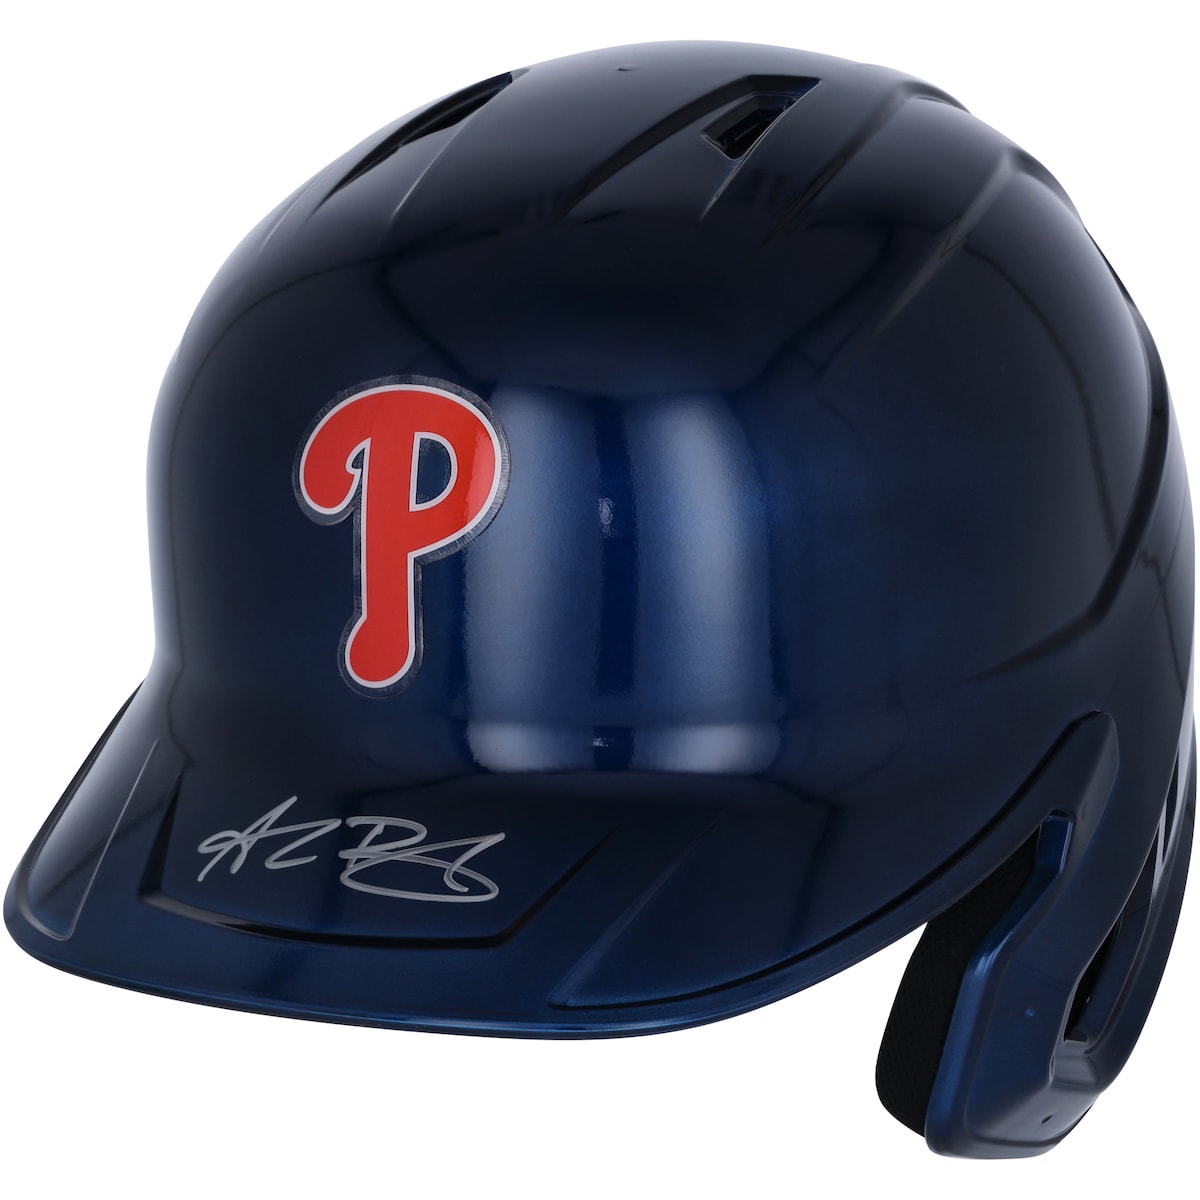 Prove you're a loyal Philadelphia Phillies supporter by adding this Alternate Chrome Rawlings Mach Pro Replica Batting H...